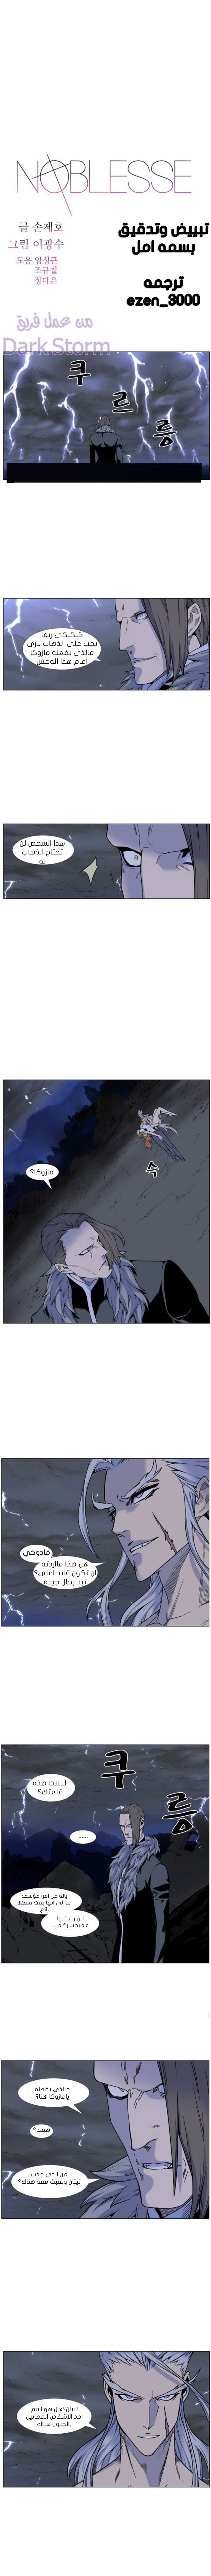 Noblesse: Chapter 447 - Page 1